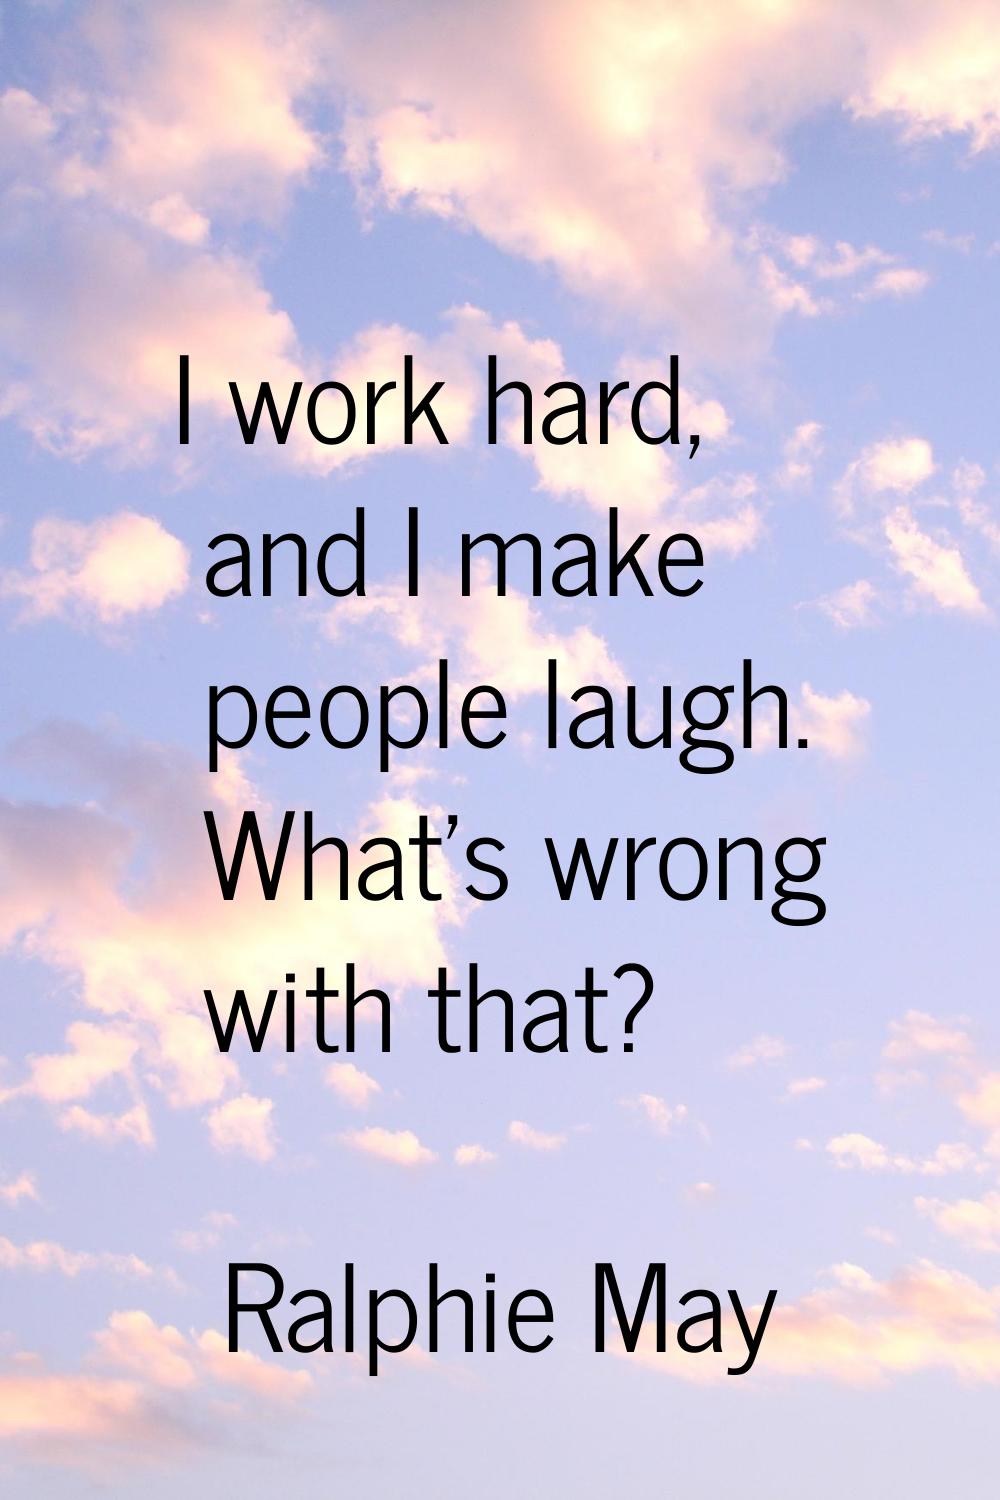 I work hard, and I make people laugh. What's wrong with that?